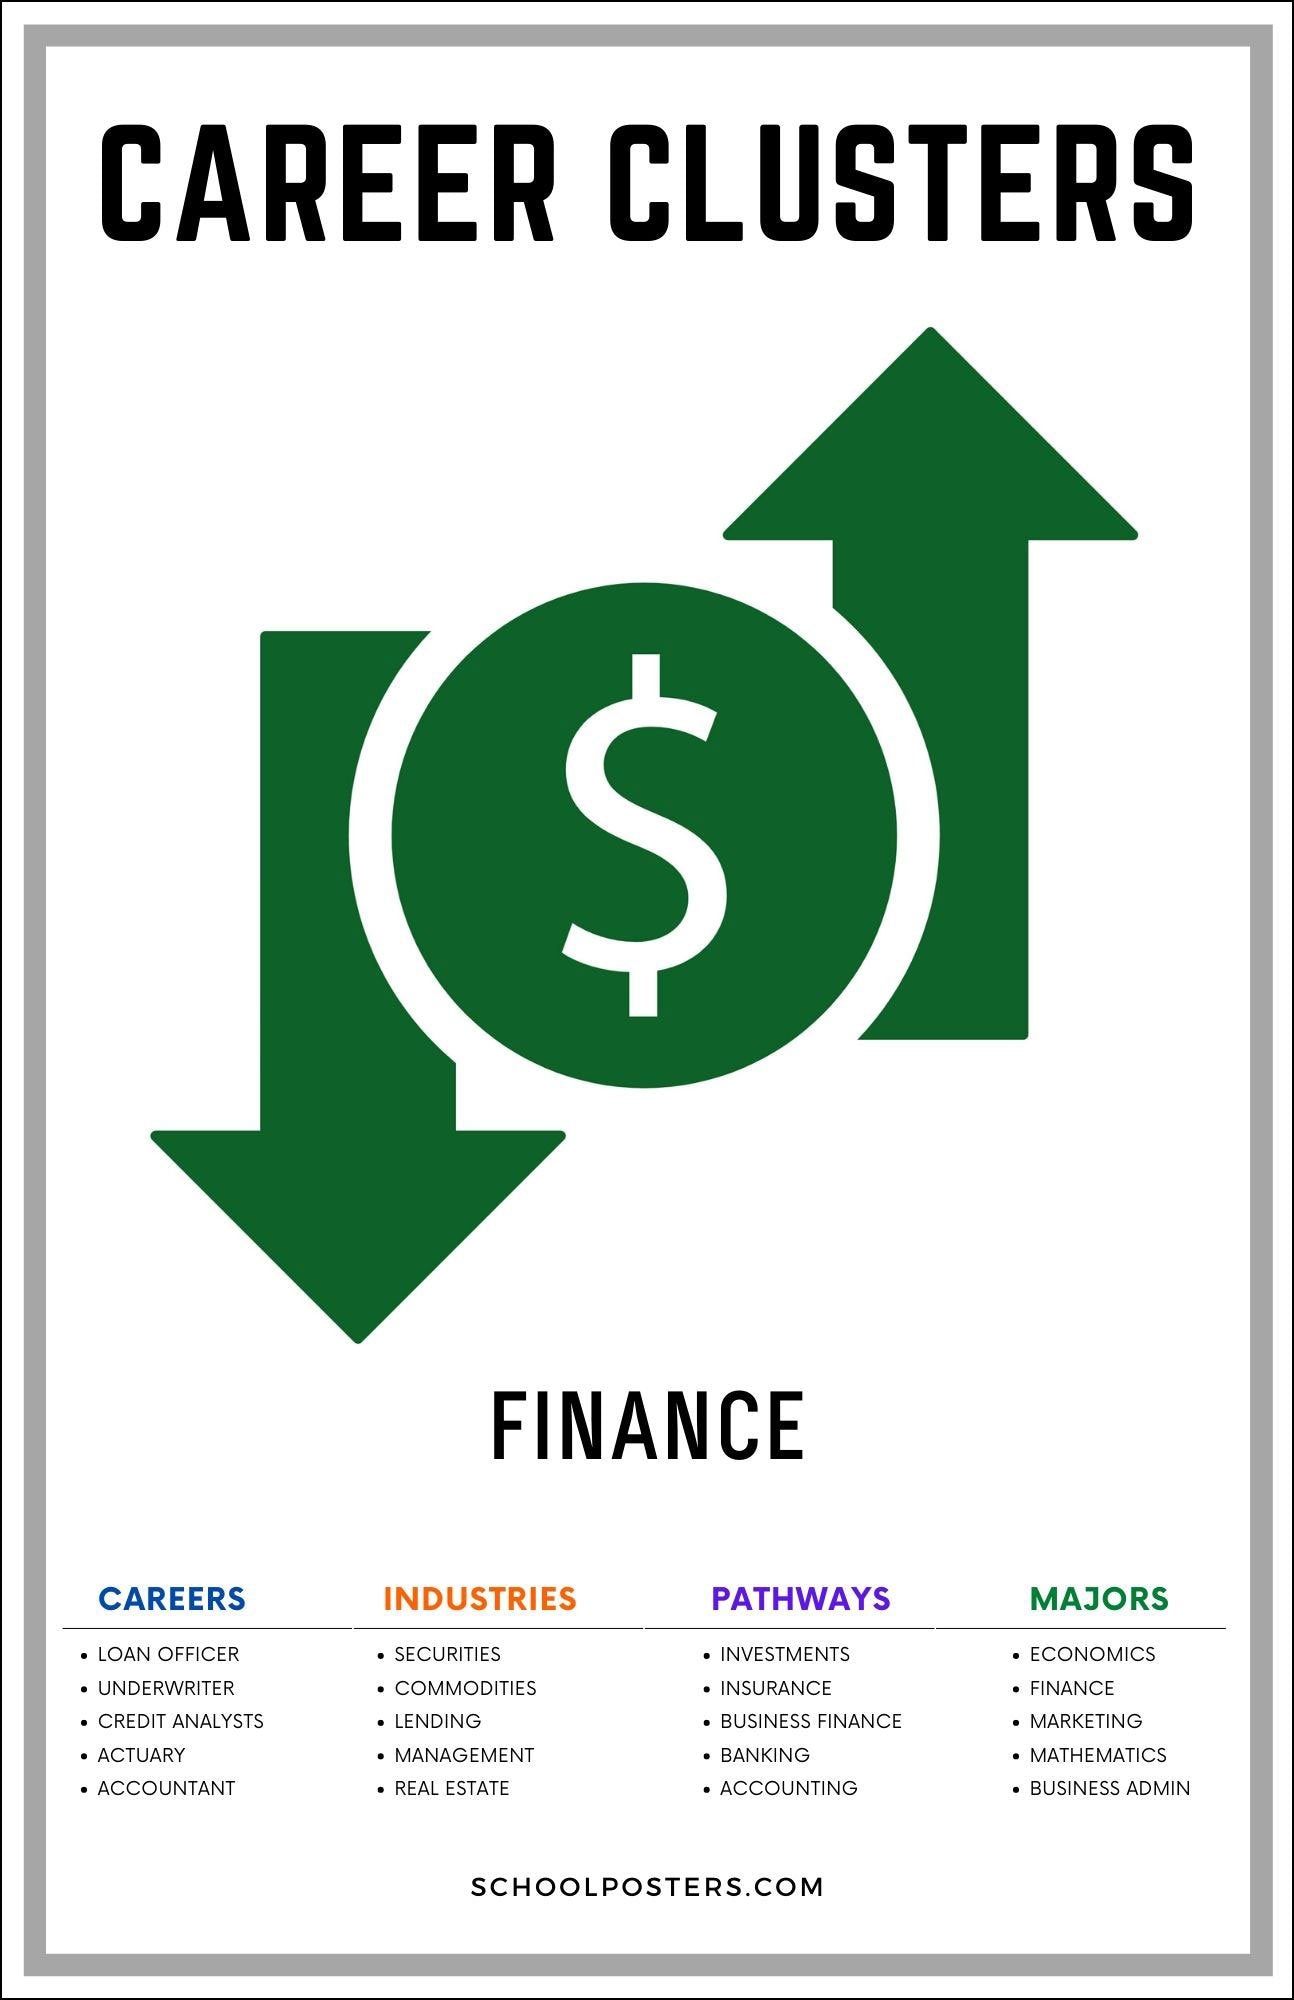 Career Clusters Finance Poster